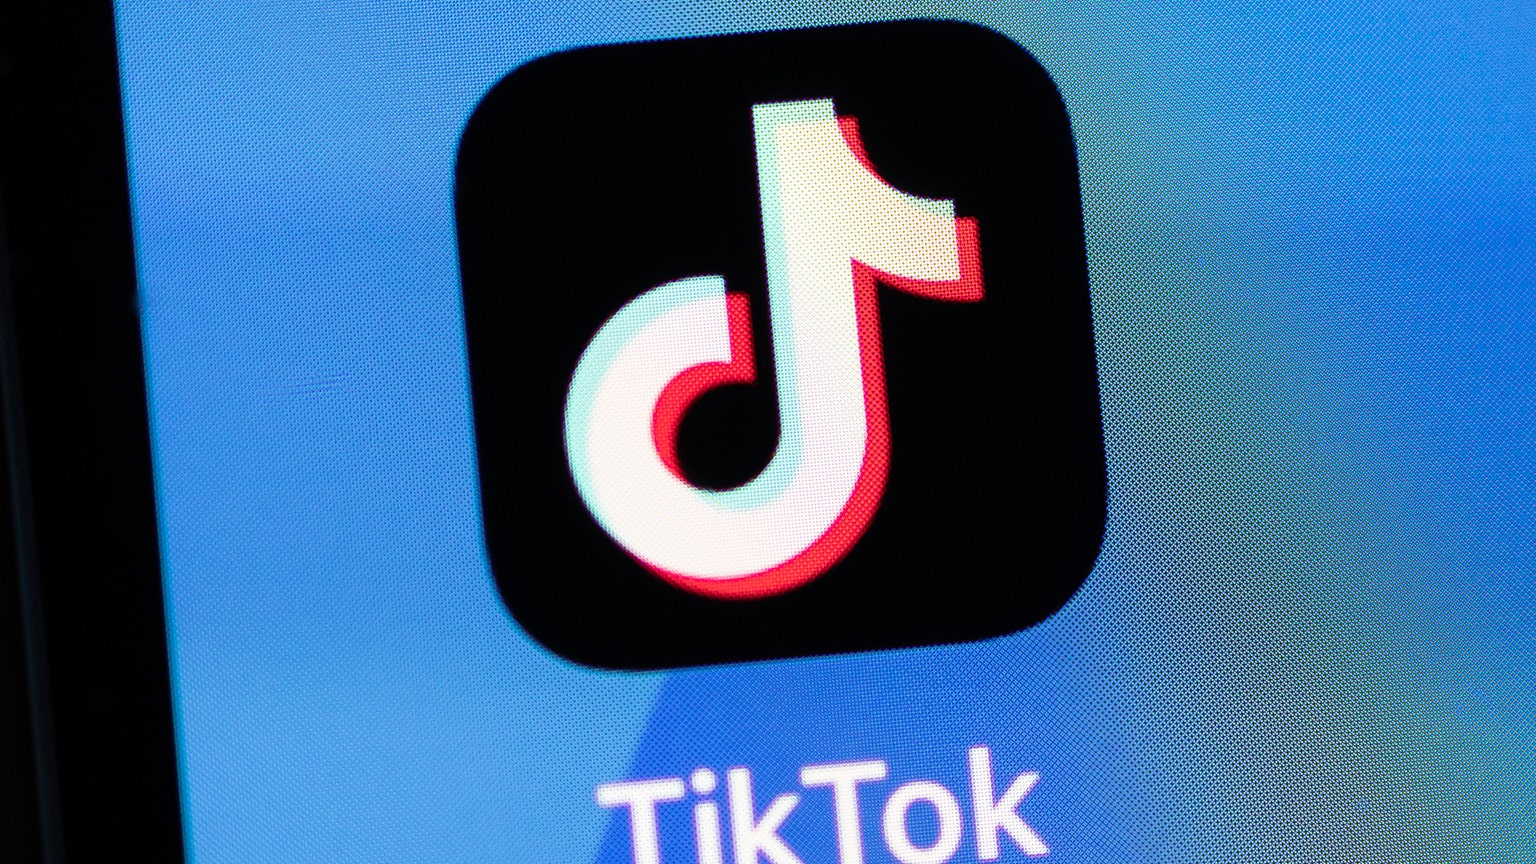 chess best move extension｜TikTok Search